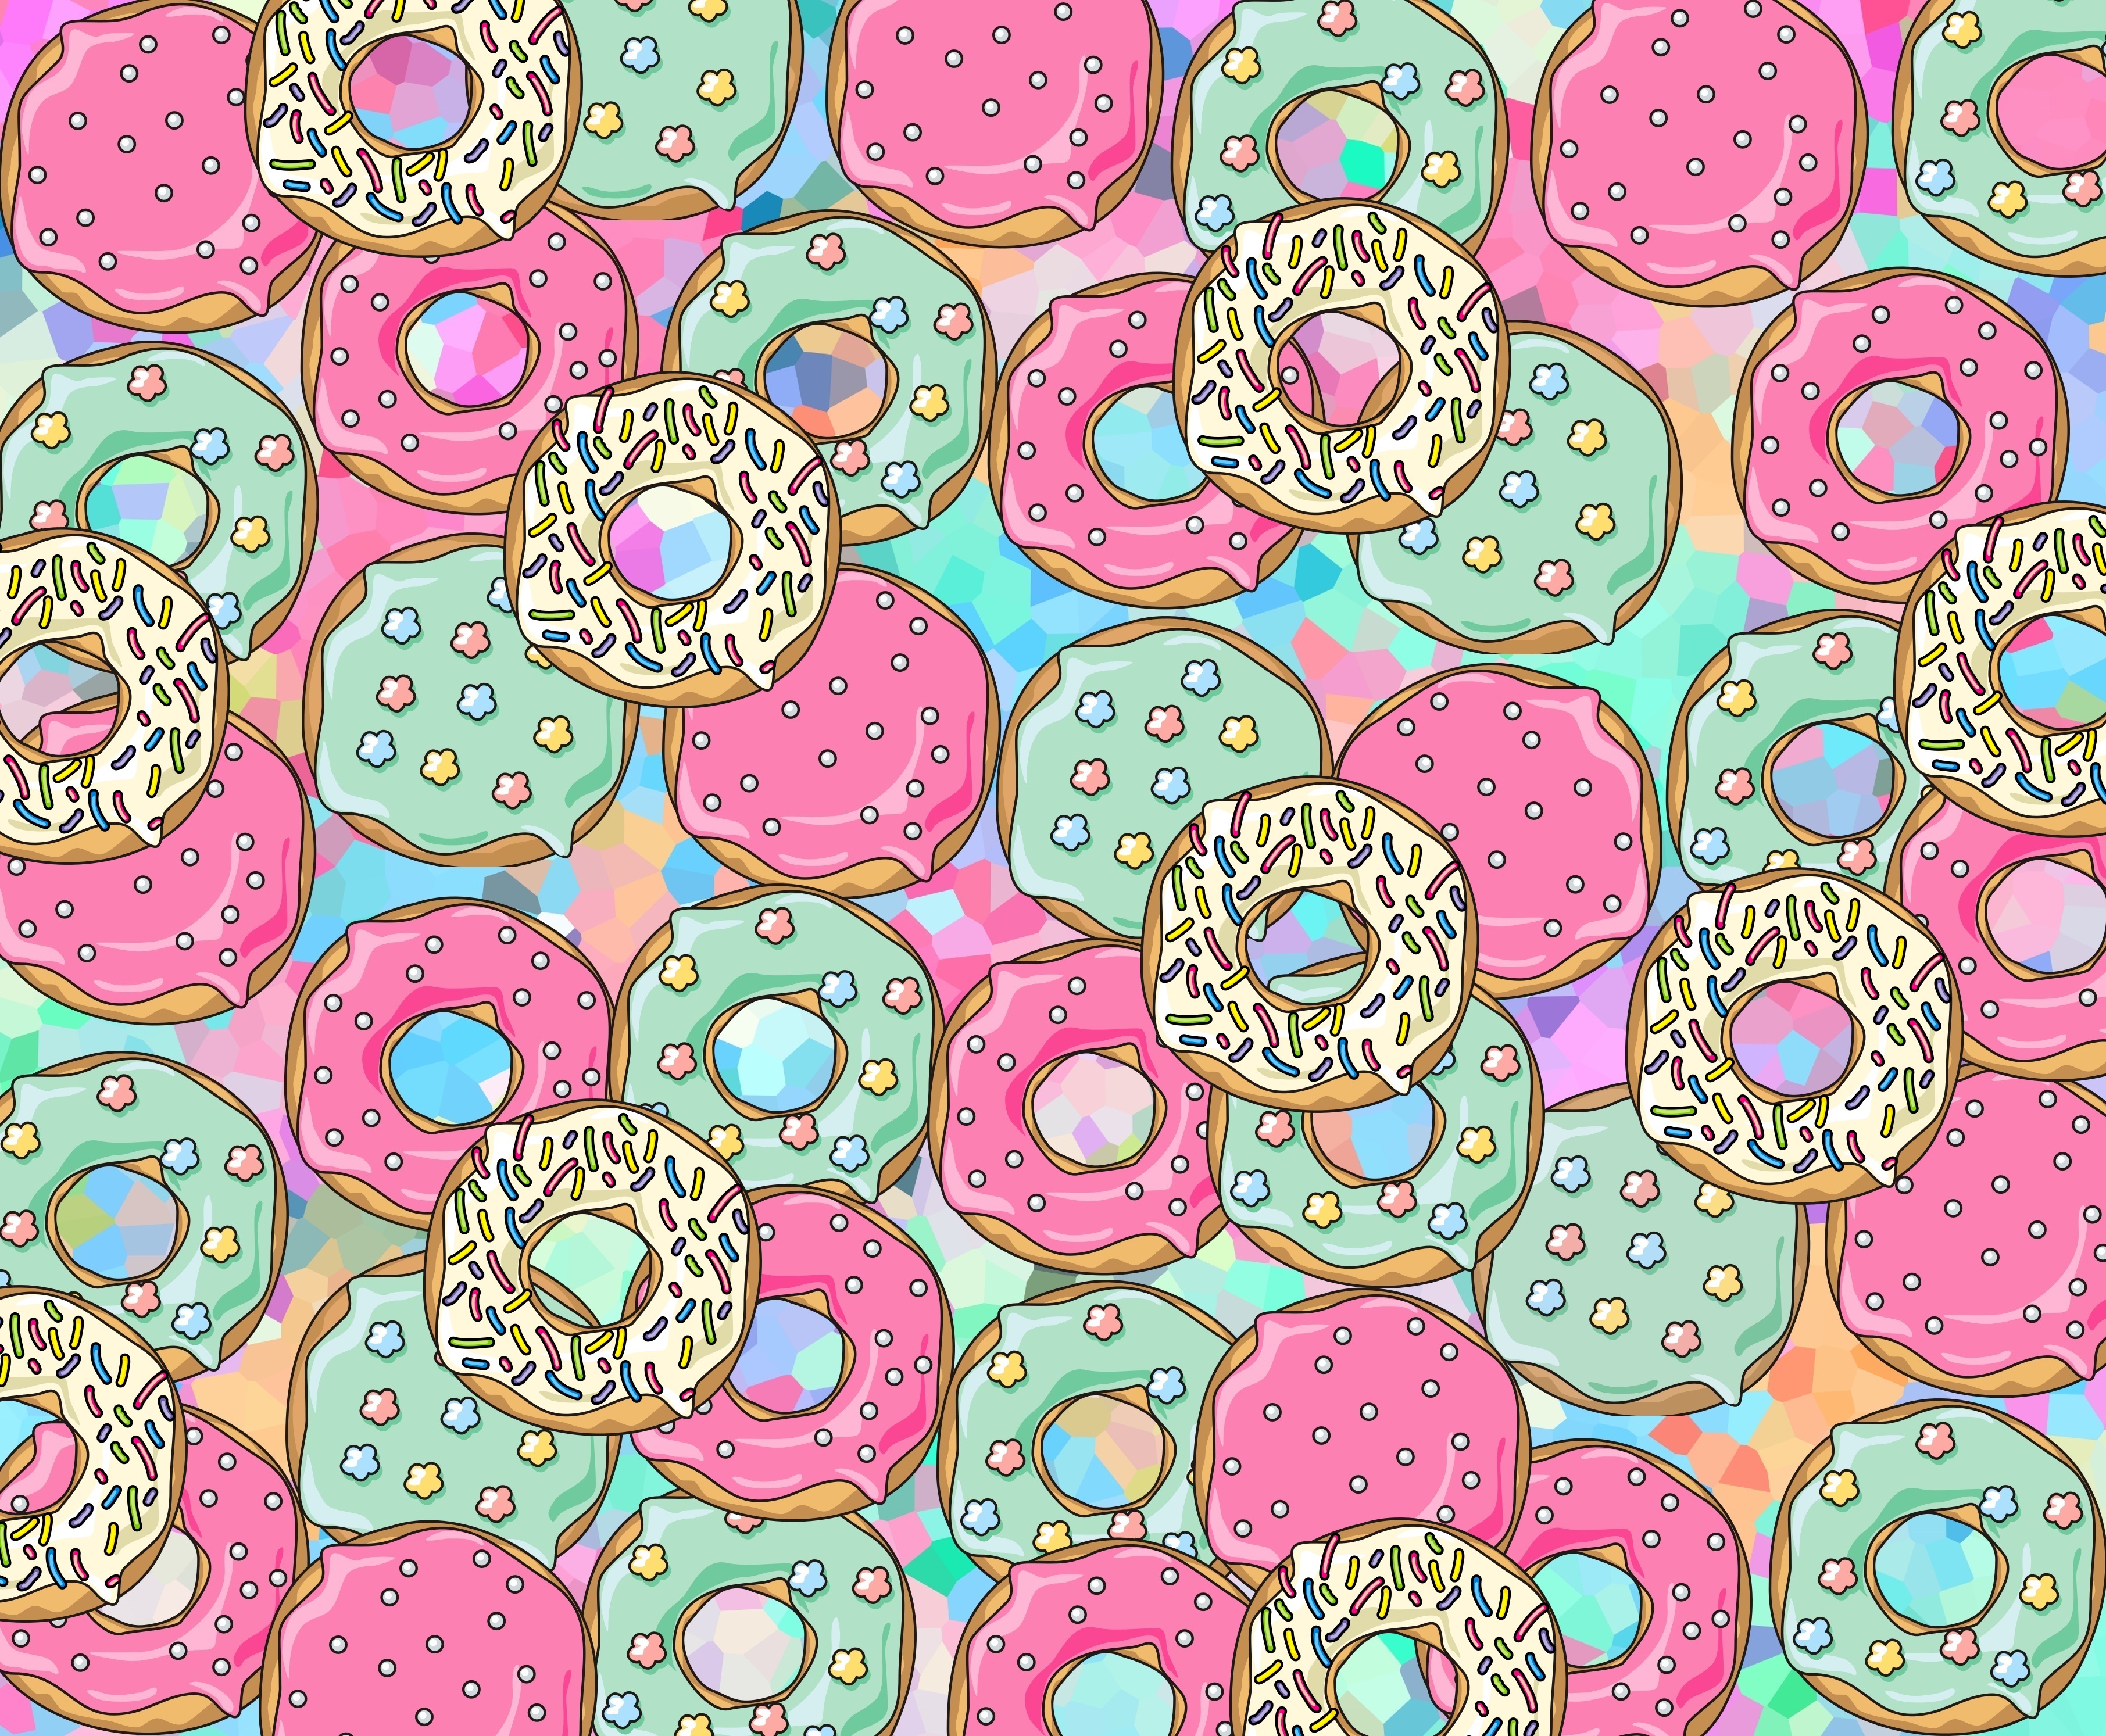 motley, donuts, patterns, multicolored, texture, textures, sweet